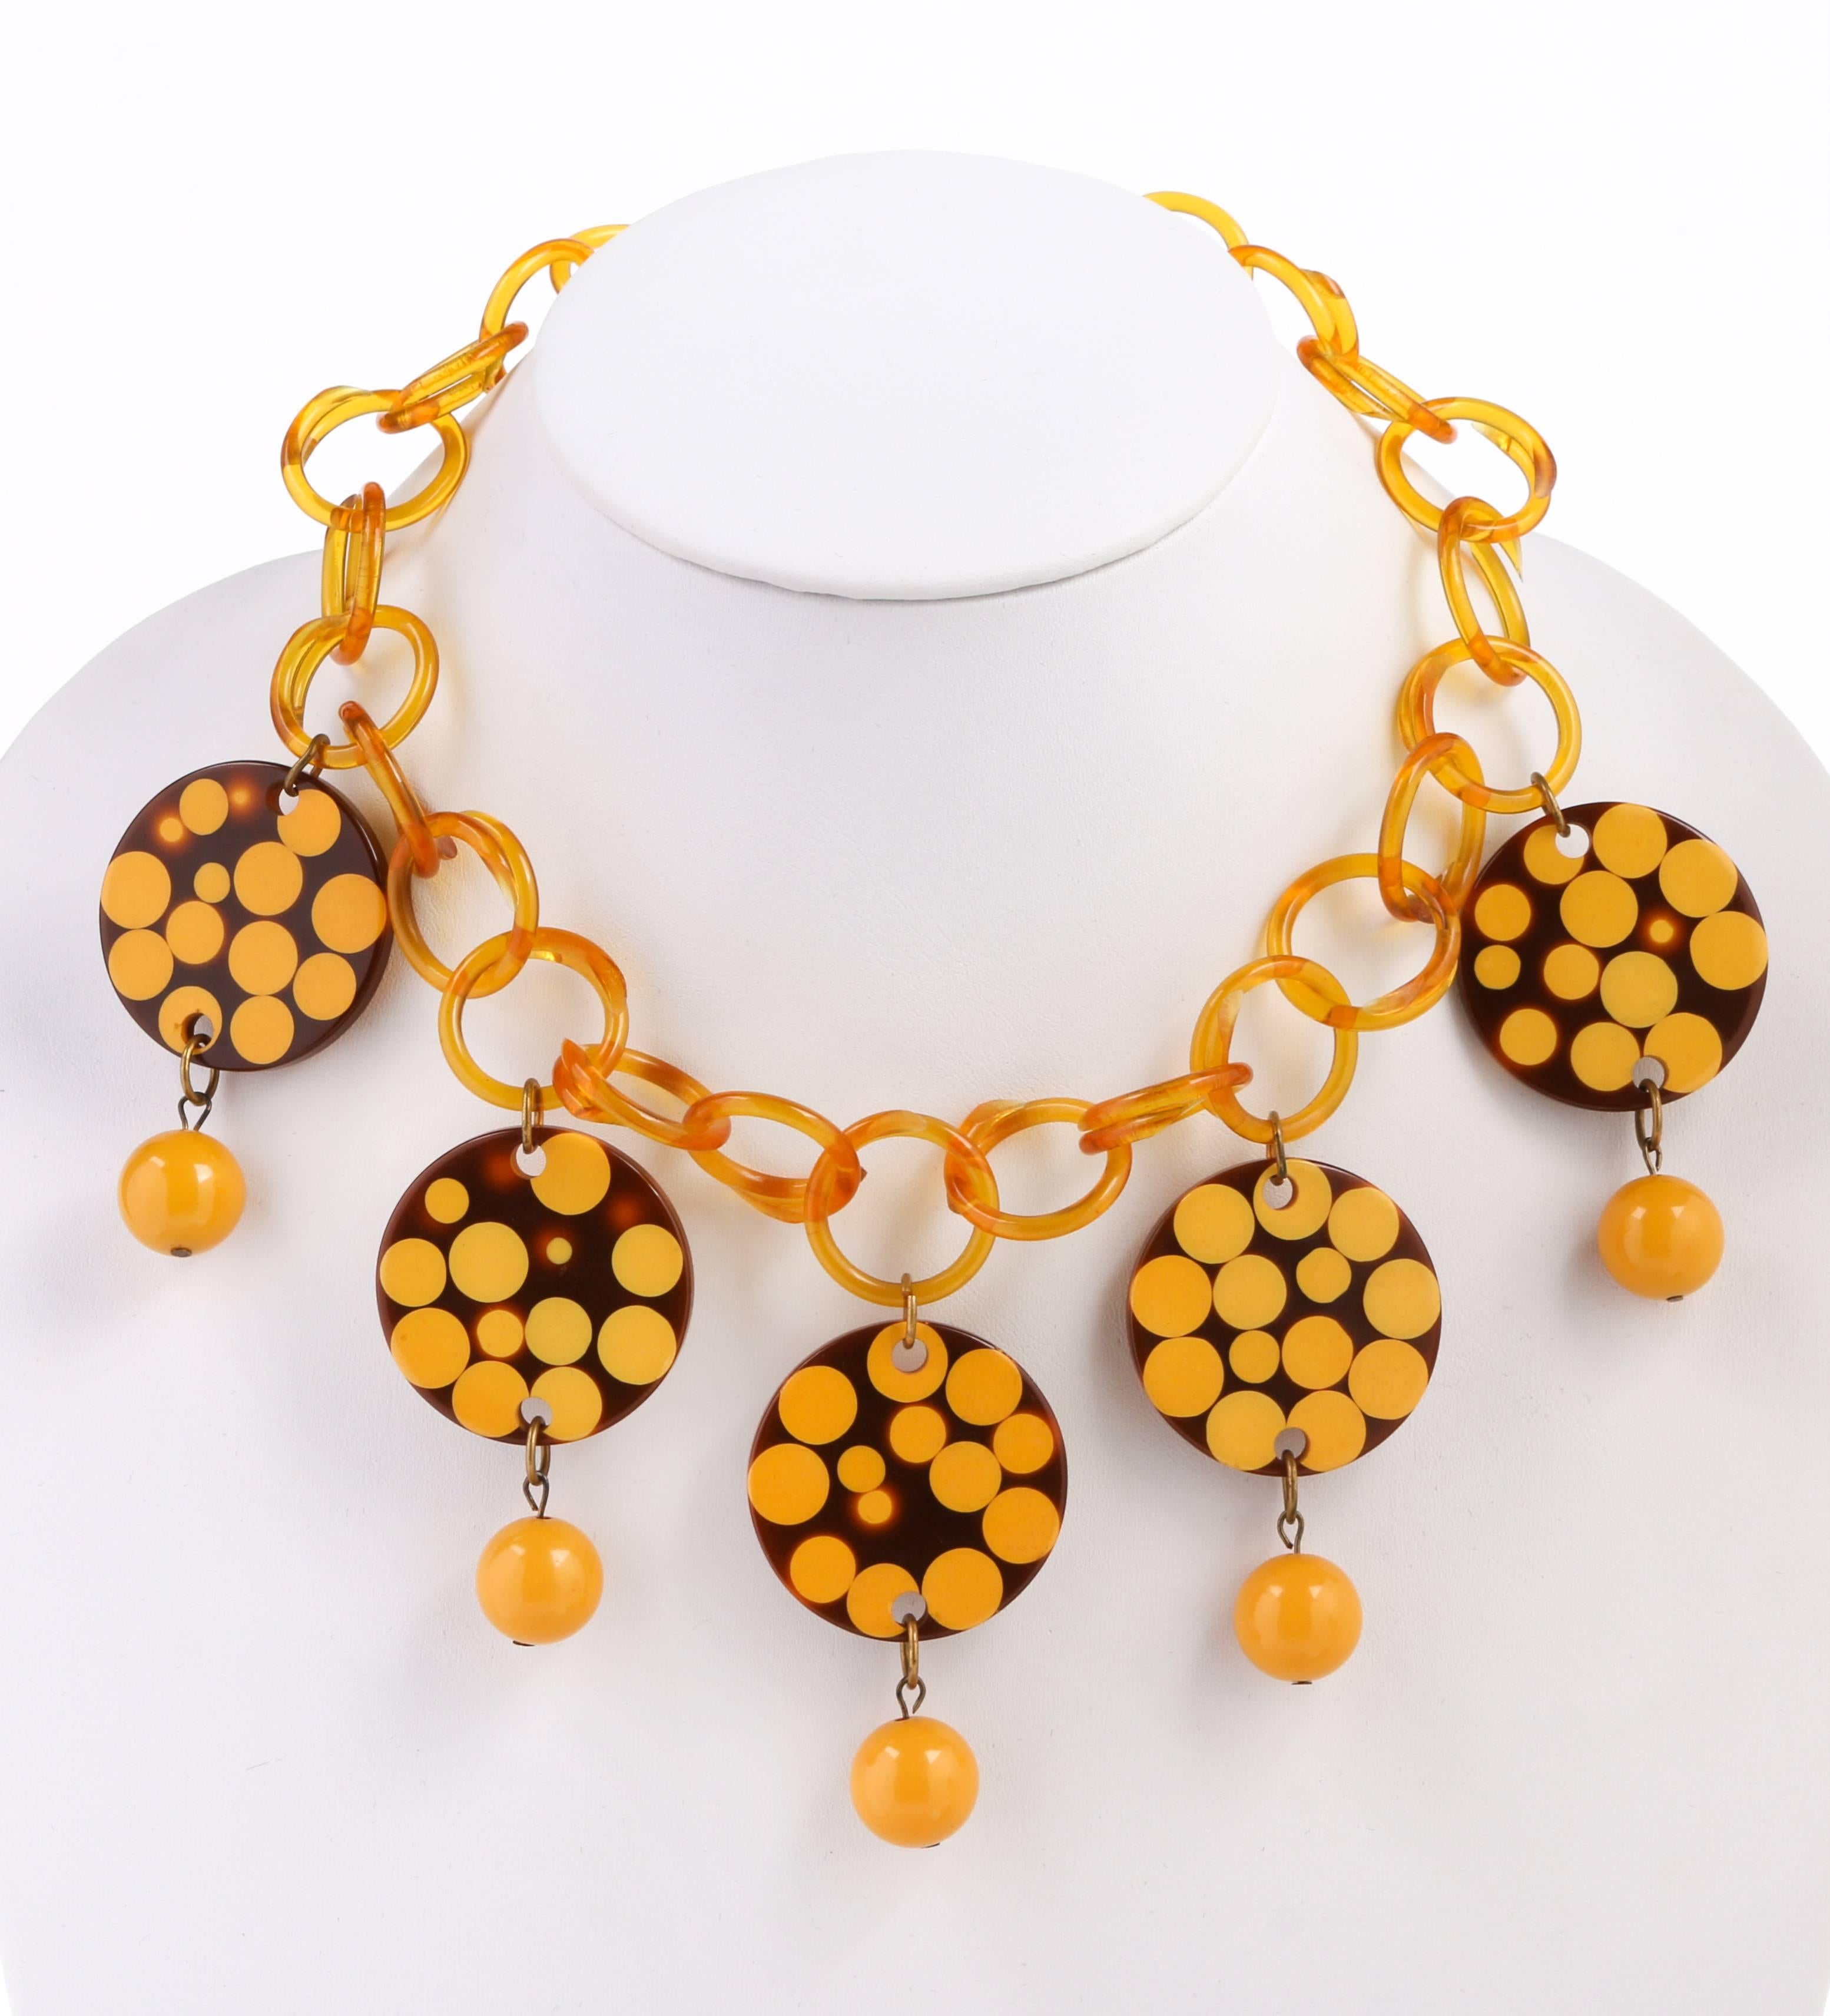 A rare, one of a kind, Charles Elkaim Bakelite link necklace. Large open link butterscotch colored round link chain (each link slightly under 1”) with a front section of five large brown discs (approximately 1.5”) with polka dot detail. Bold yellow